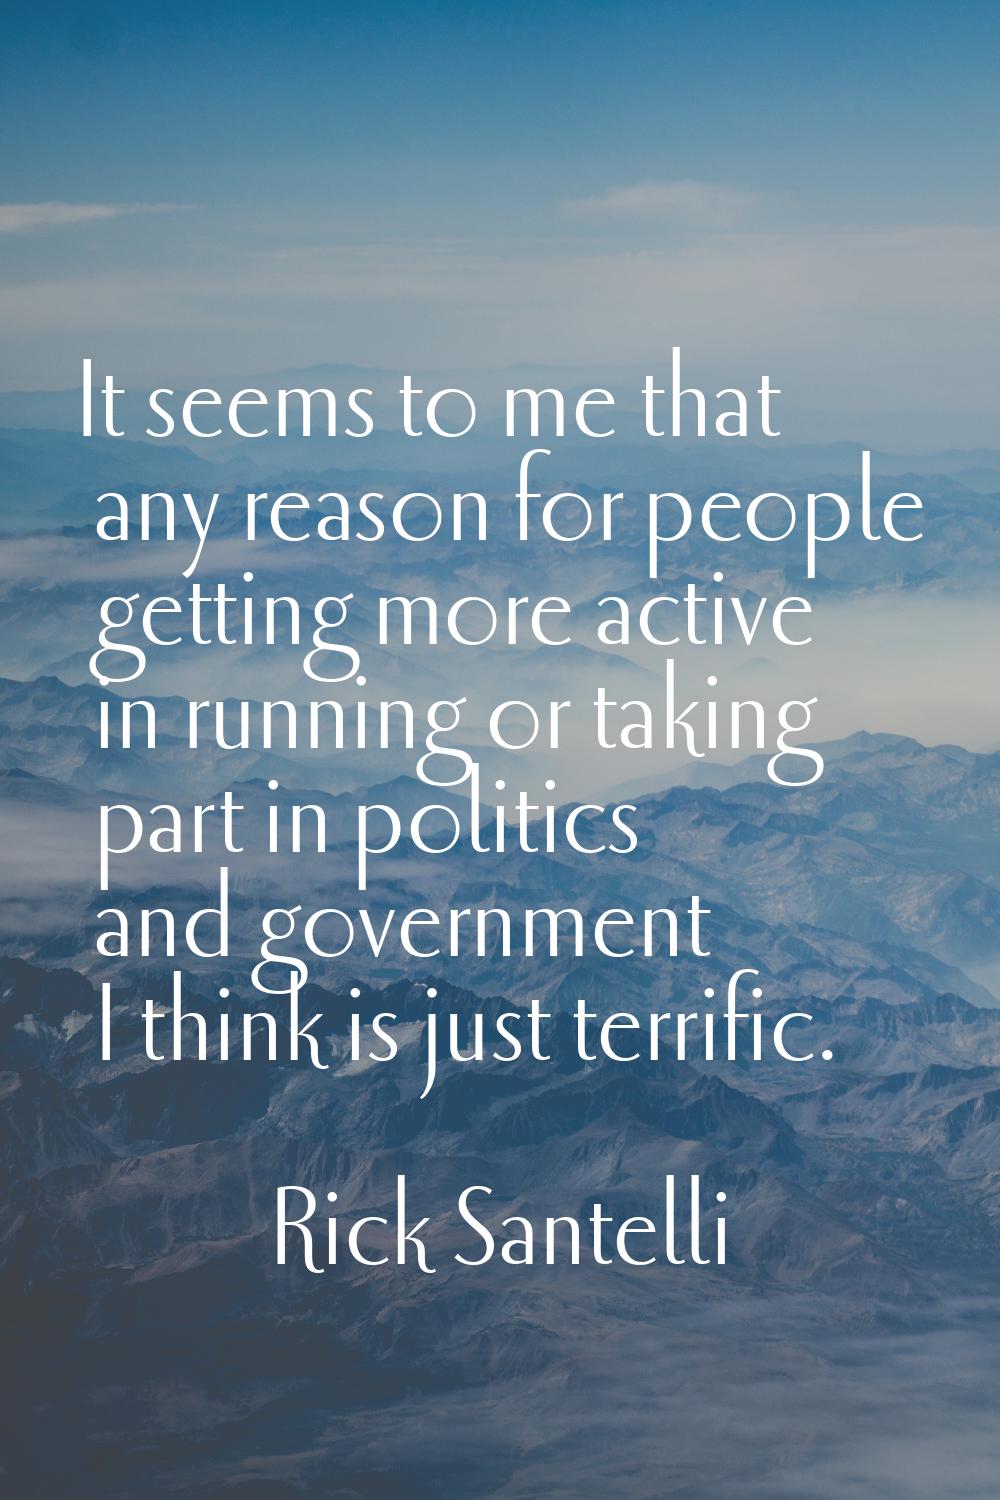 It seems to me that any reason for people getting more active in running or taking part in politics